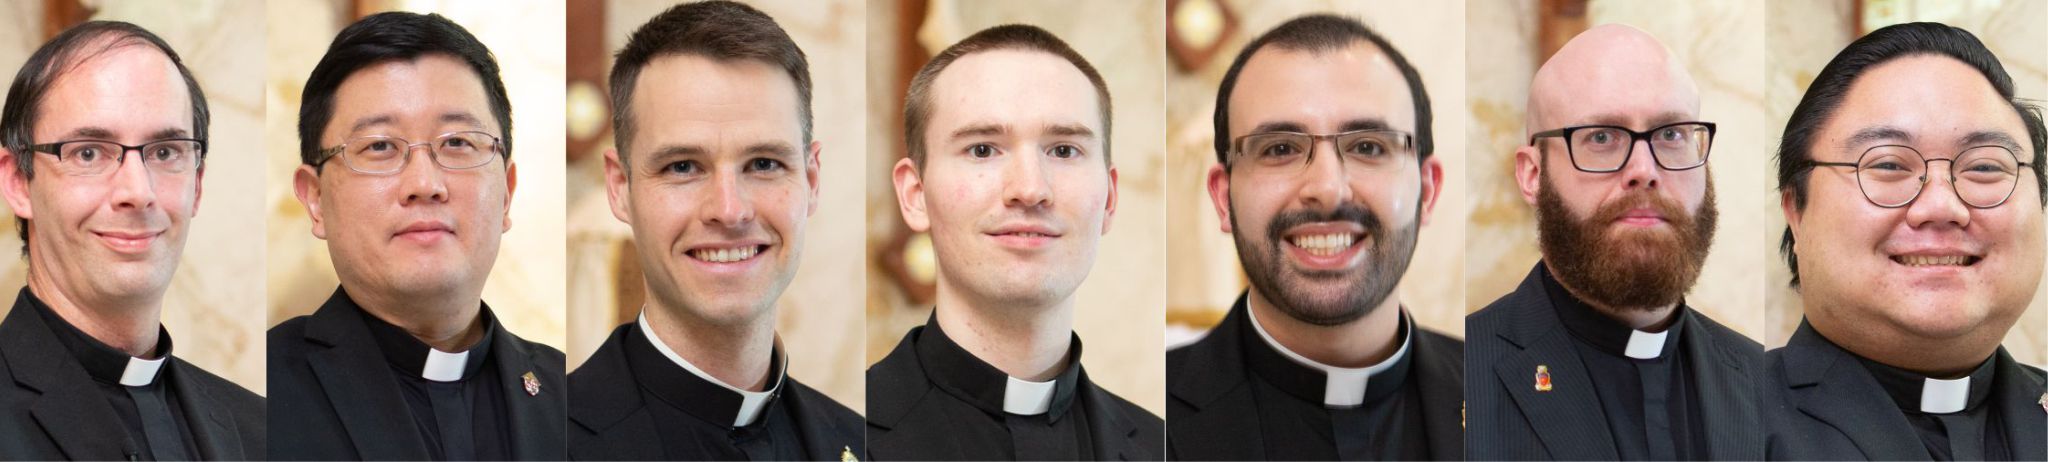 Archdiocese of Toronto - Watch Two Men Be Ordained to the Priesthood on ...